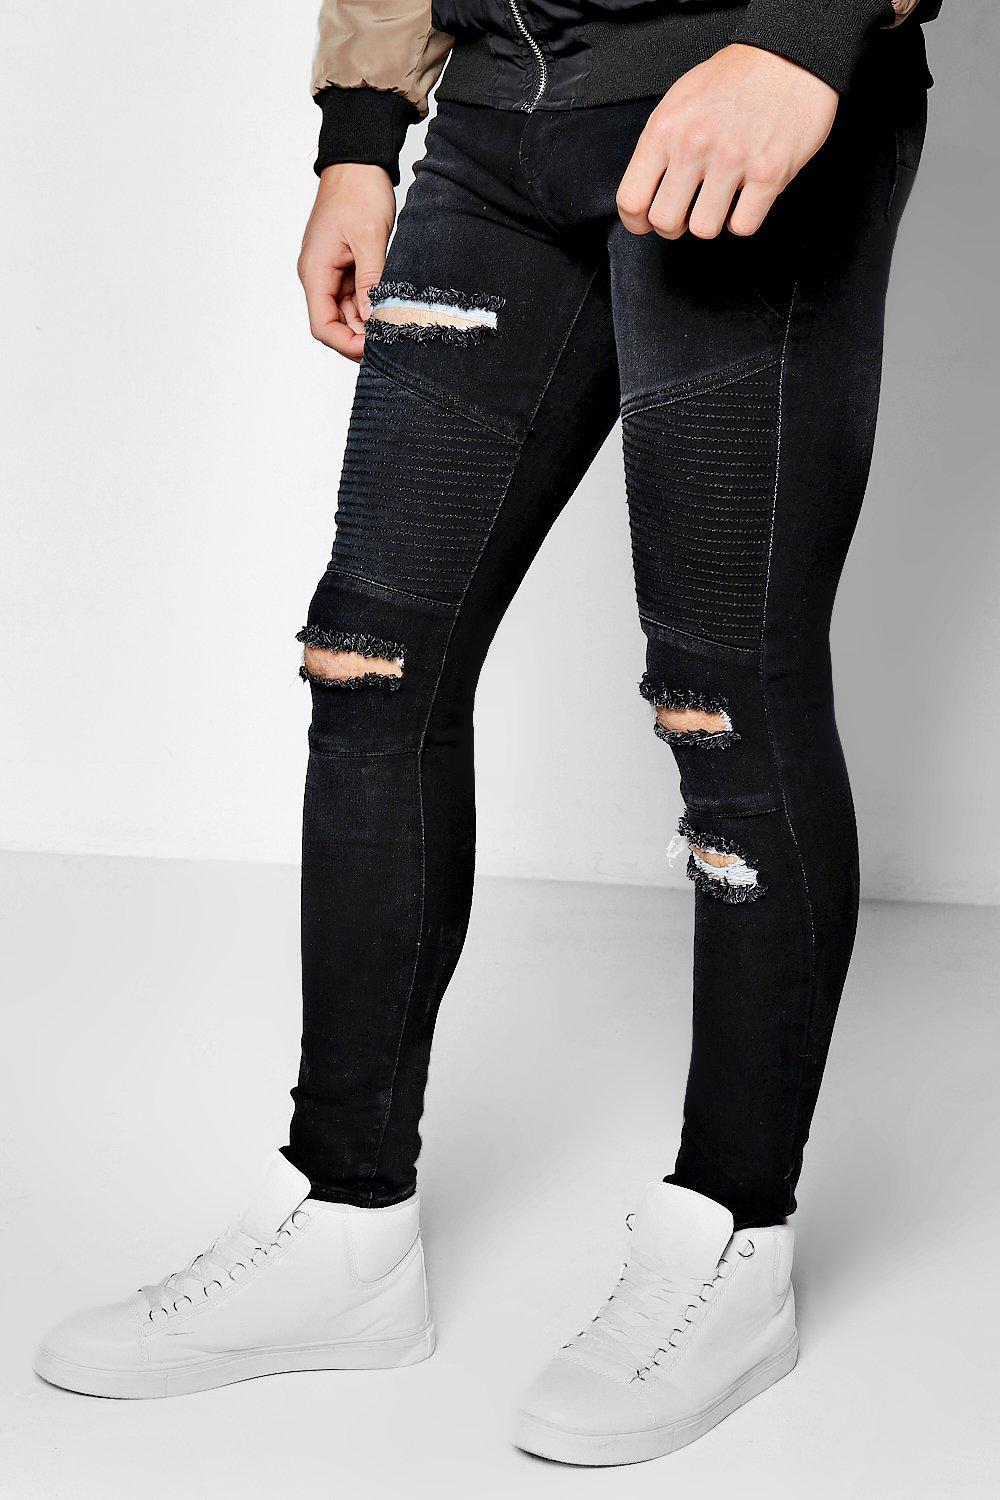 boohooman black ripped jeans